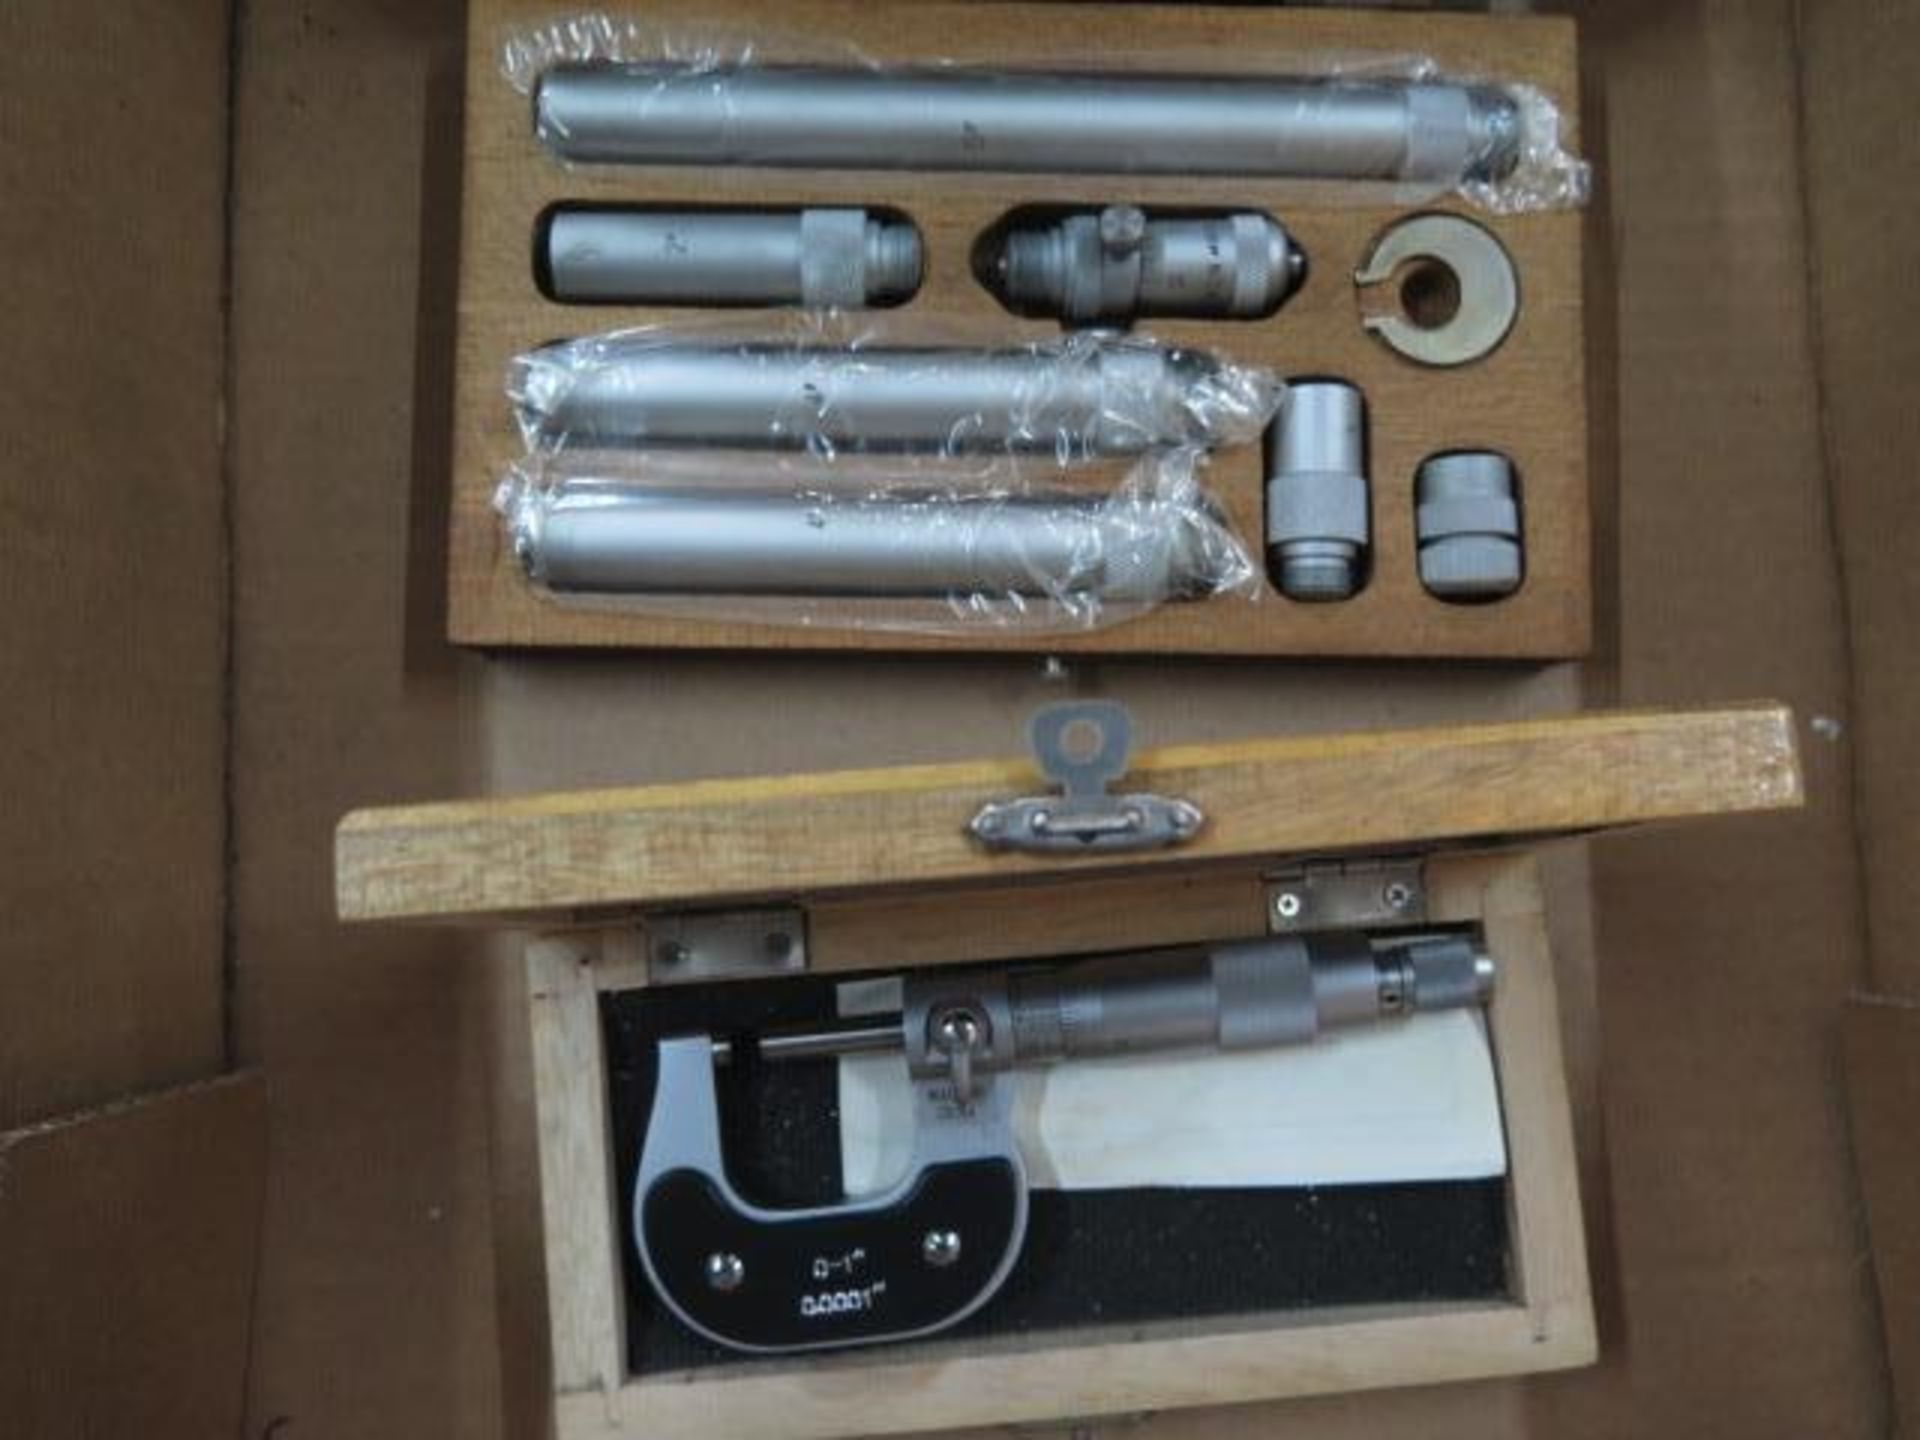 Mitutoyo 0-1" Anvil Mic, NSK 1.5"-19" Bore Mic and Import 0-1" OD Mic (SOLD AS-IS - NO WARRANTY) - Image 3 of 3